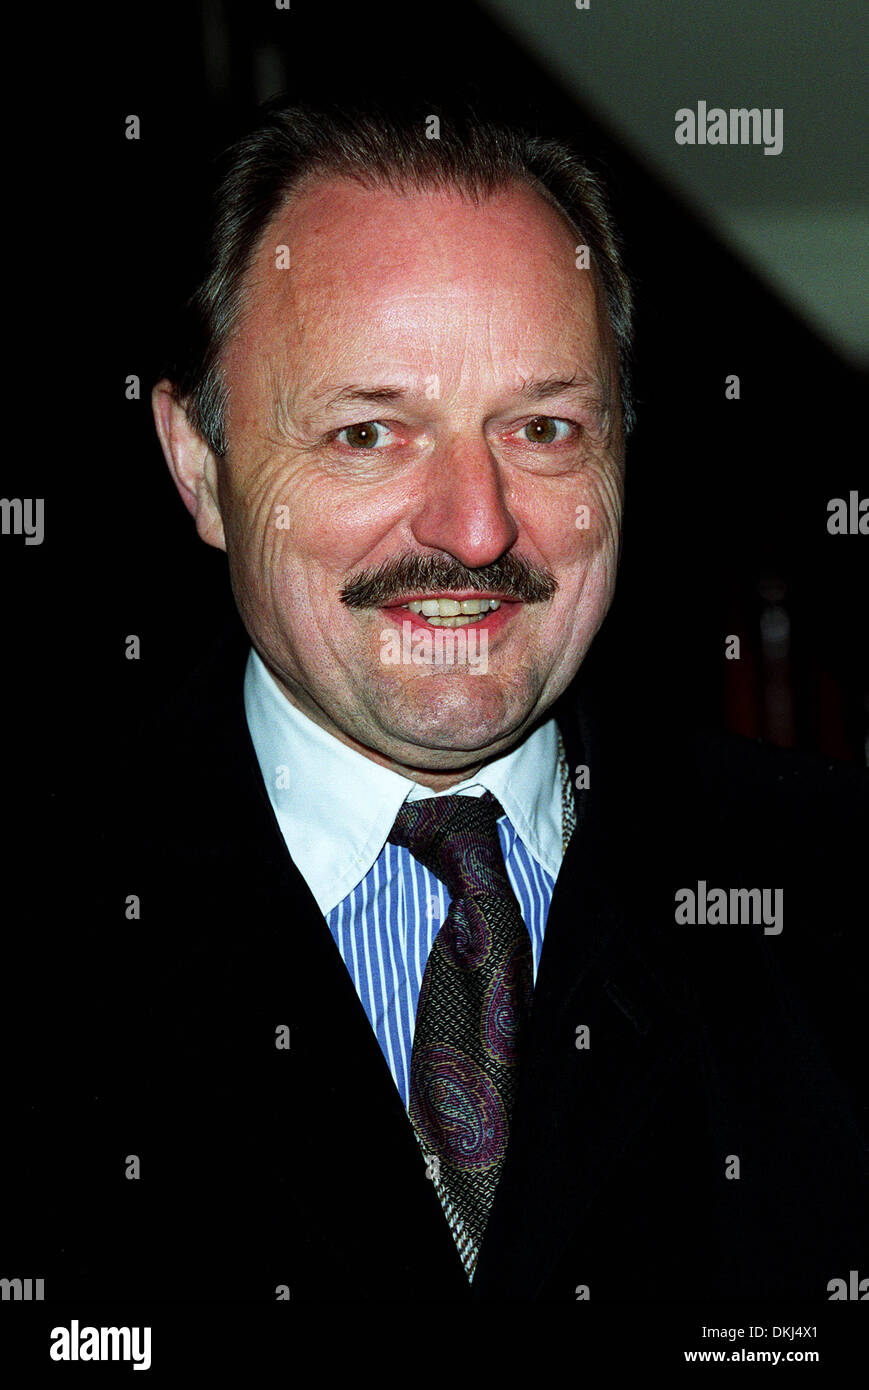 PETER BOWLES.ACTOR.26/03/2000.Y65B20A Stock Photo